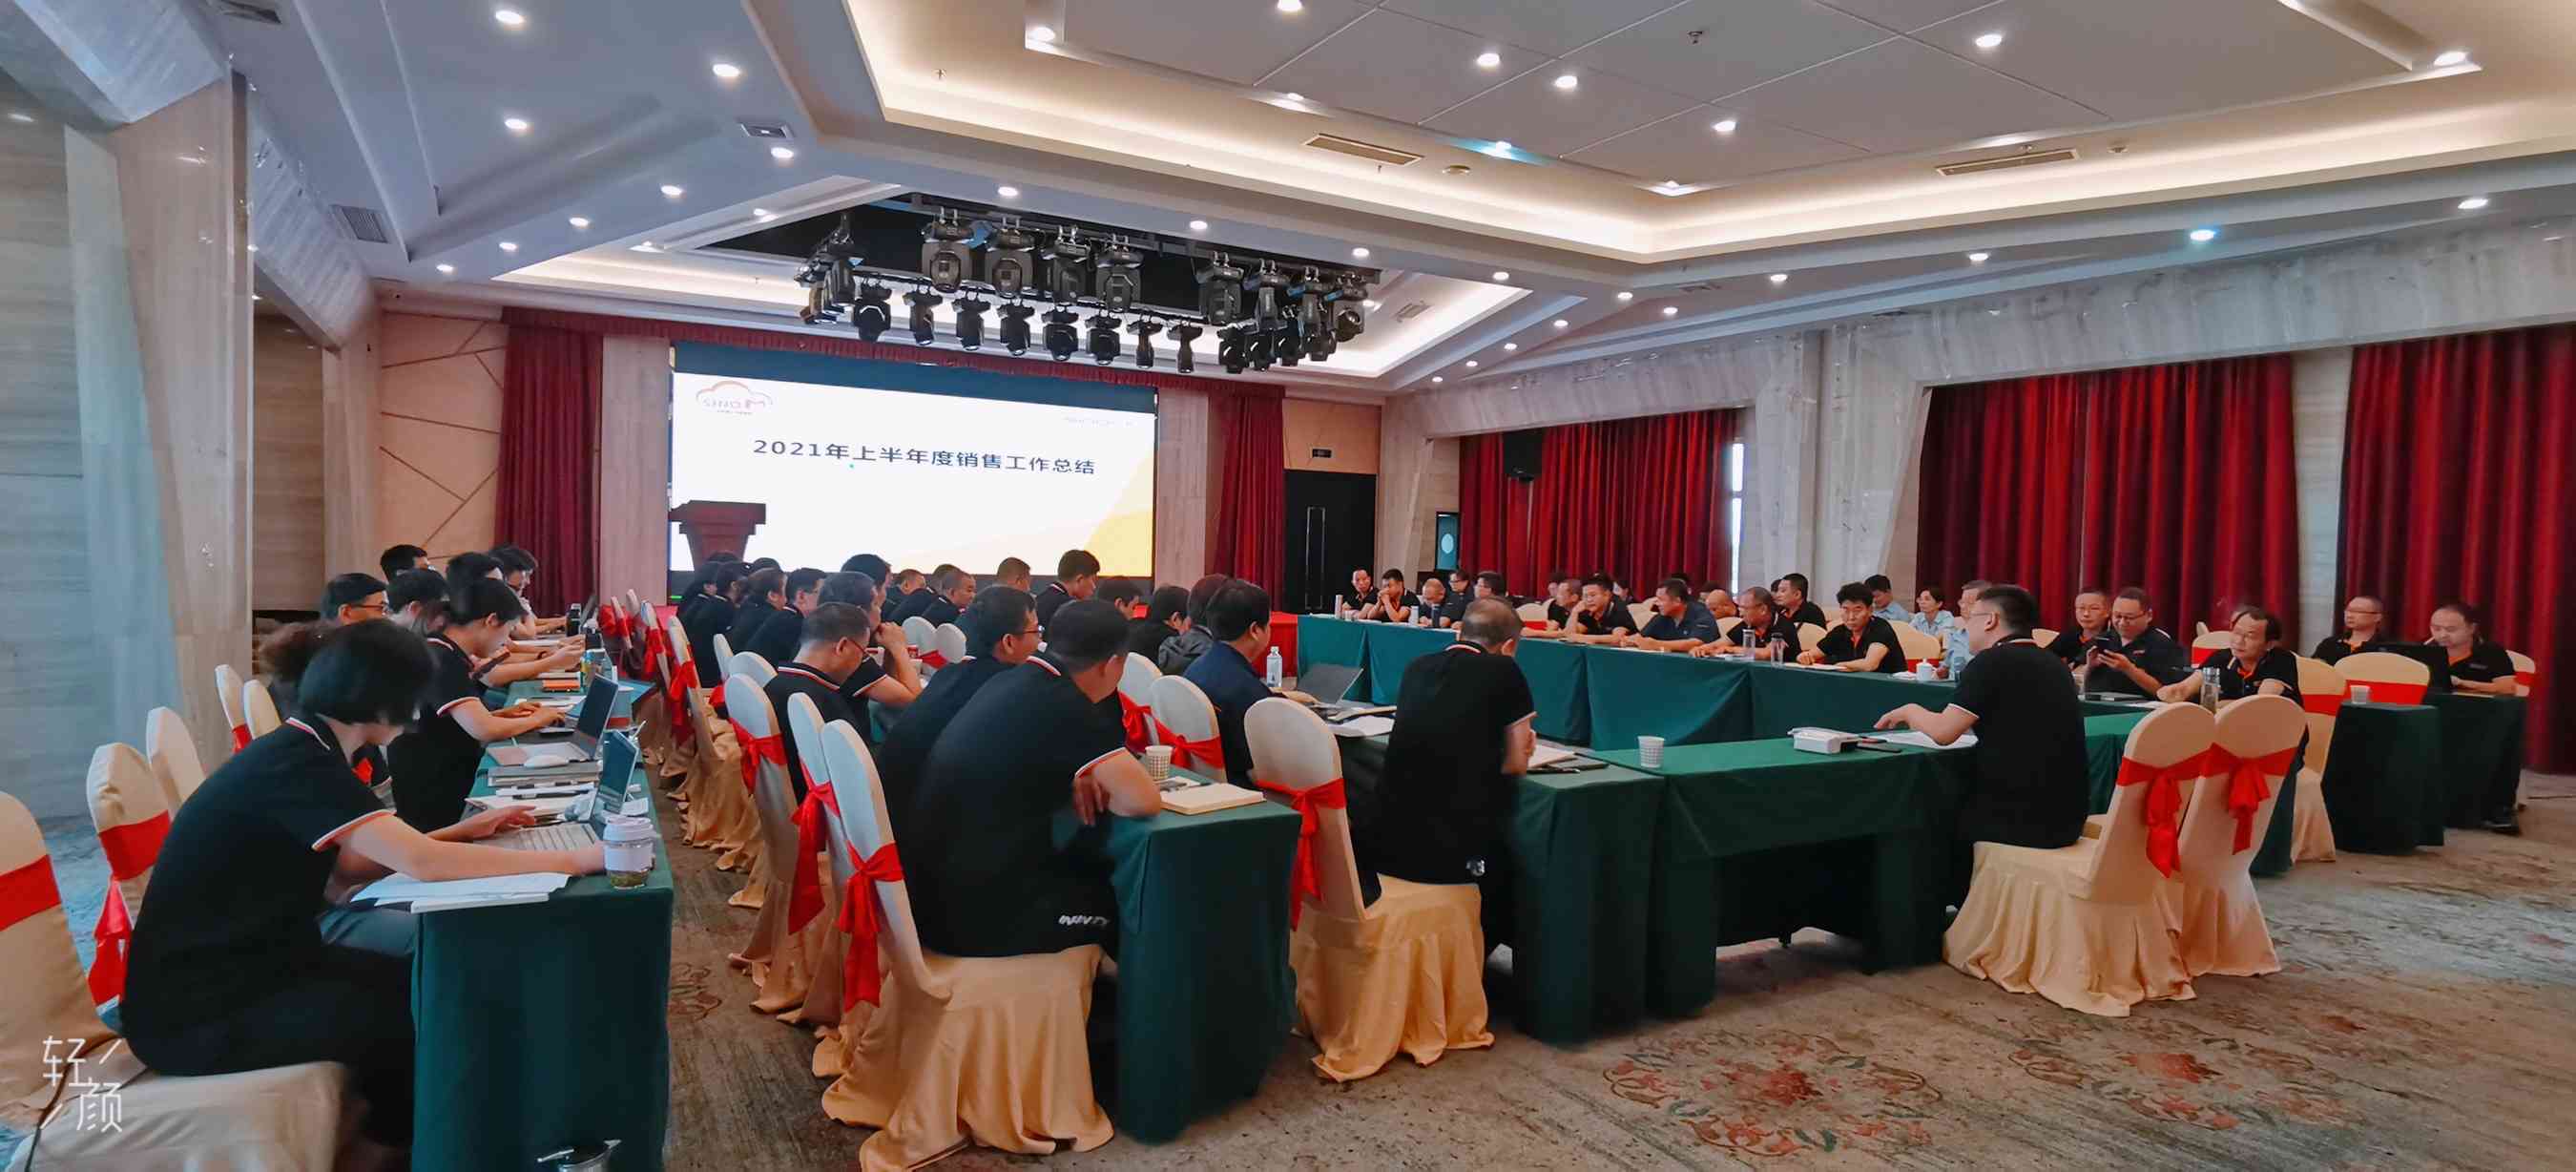 SINO 2021 Mid-year Summary Conference was held successfully